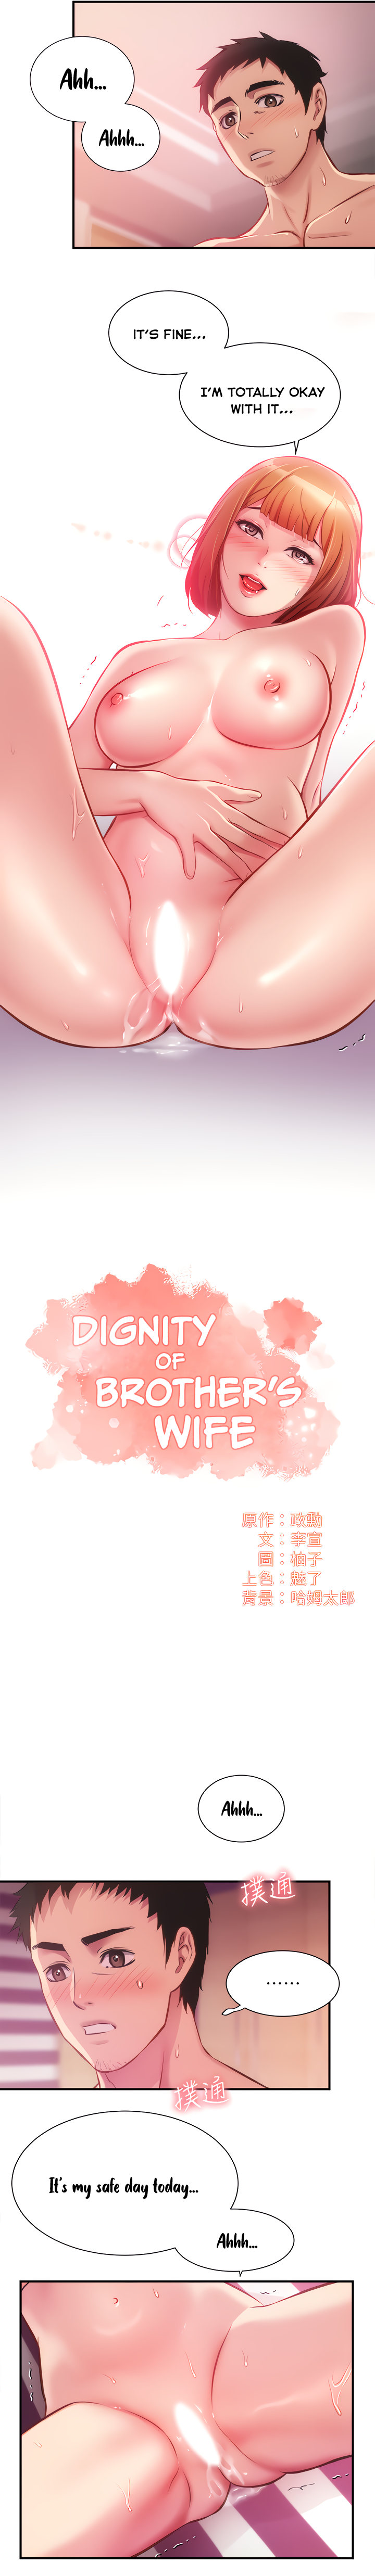 Brother’s Wife Dignity - Chapter 15 Page 2